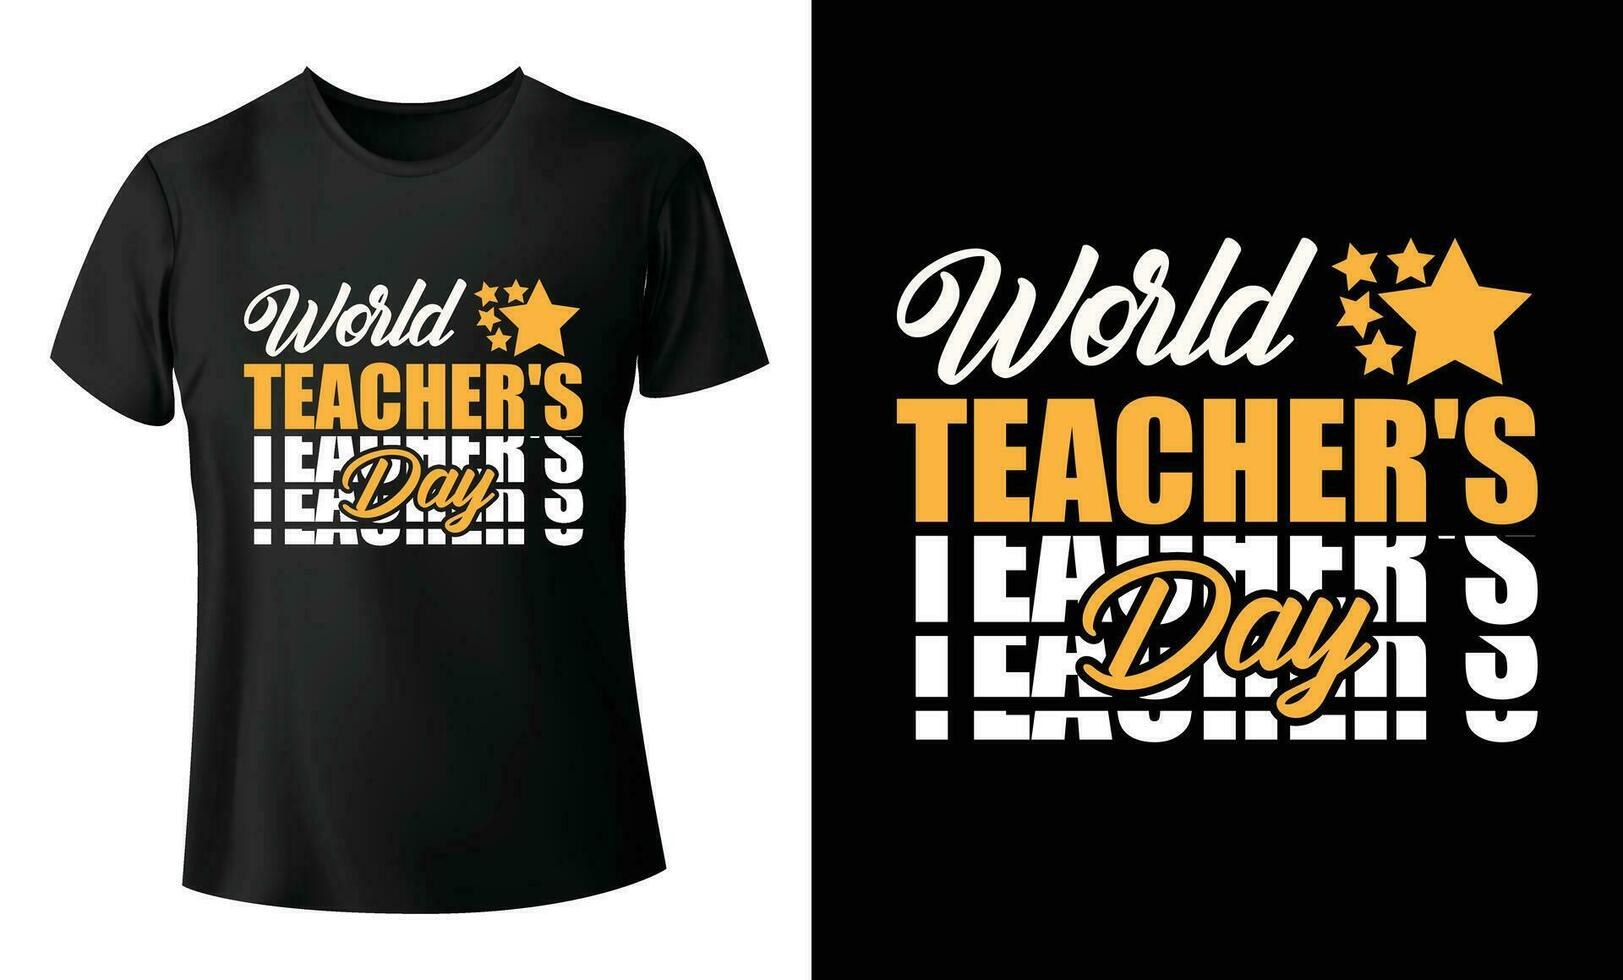 World Teachers Day Typography T Shirt Design Vector, Holiday Typographic T Shirt Design, Celebration And Event Shirt, Calligraphy, Lettering Vintage, Greeting Card Vector Illustration